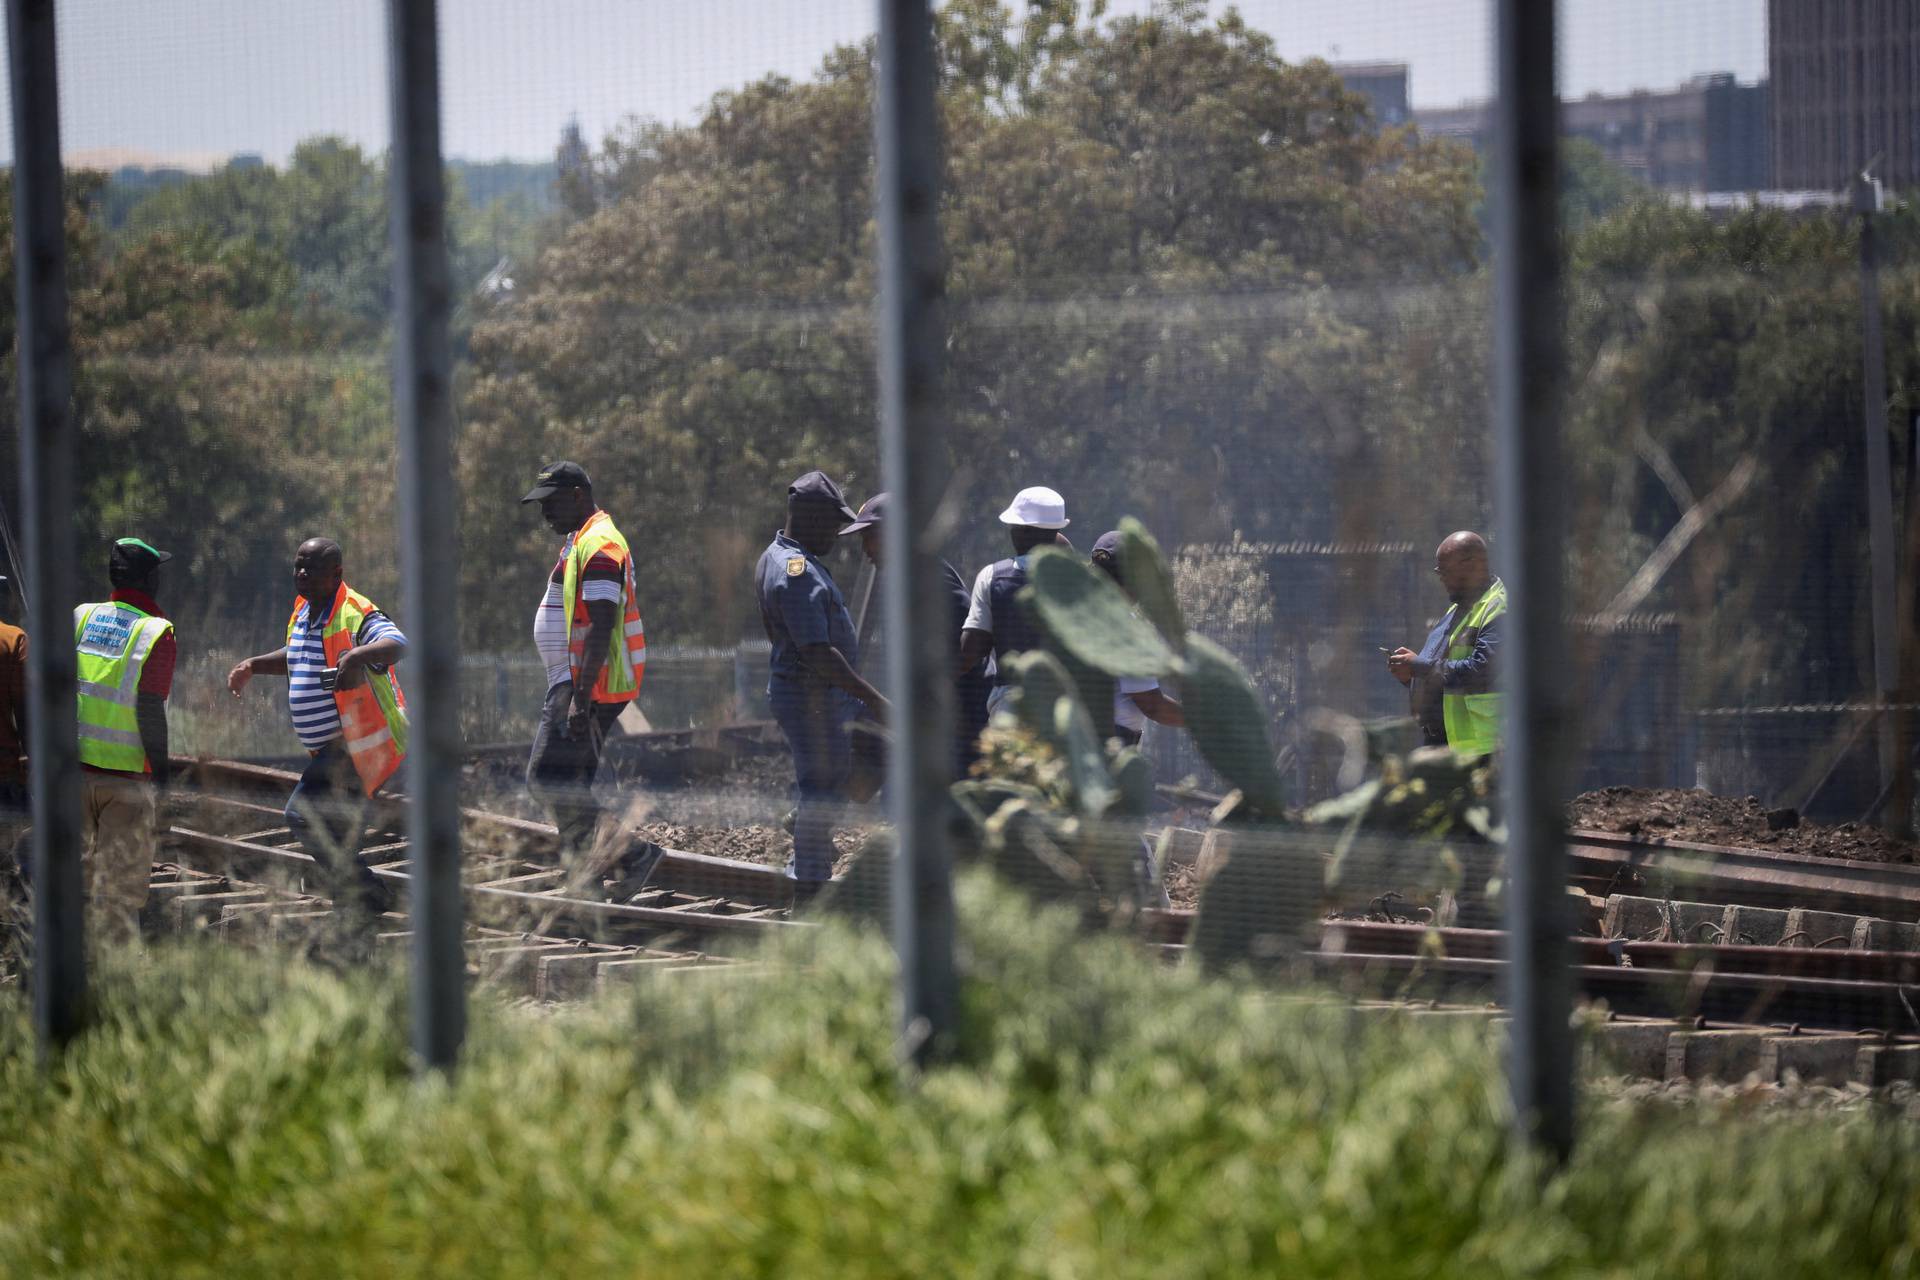 Emergency services work at the scene where a gas tanker exploded in Boksburg near Johannesburg